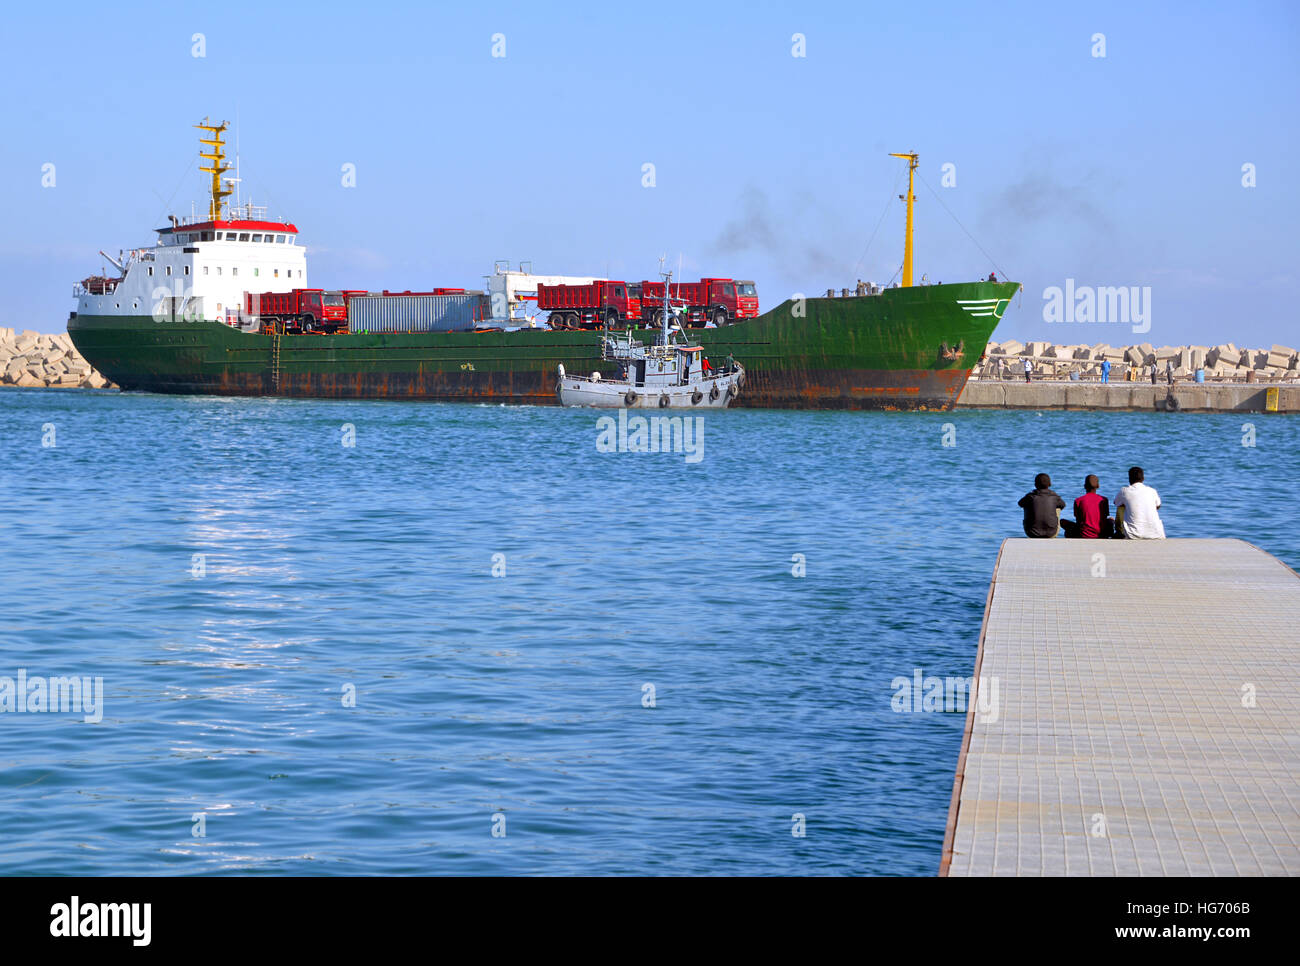 Three boys sitting on a pier watching a small container ship unload cargo, Puntland Somalia Stock Photo